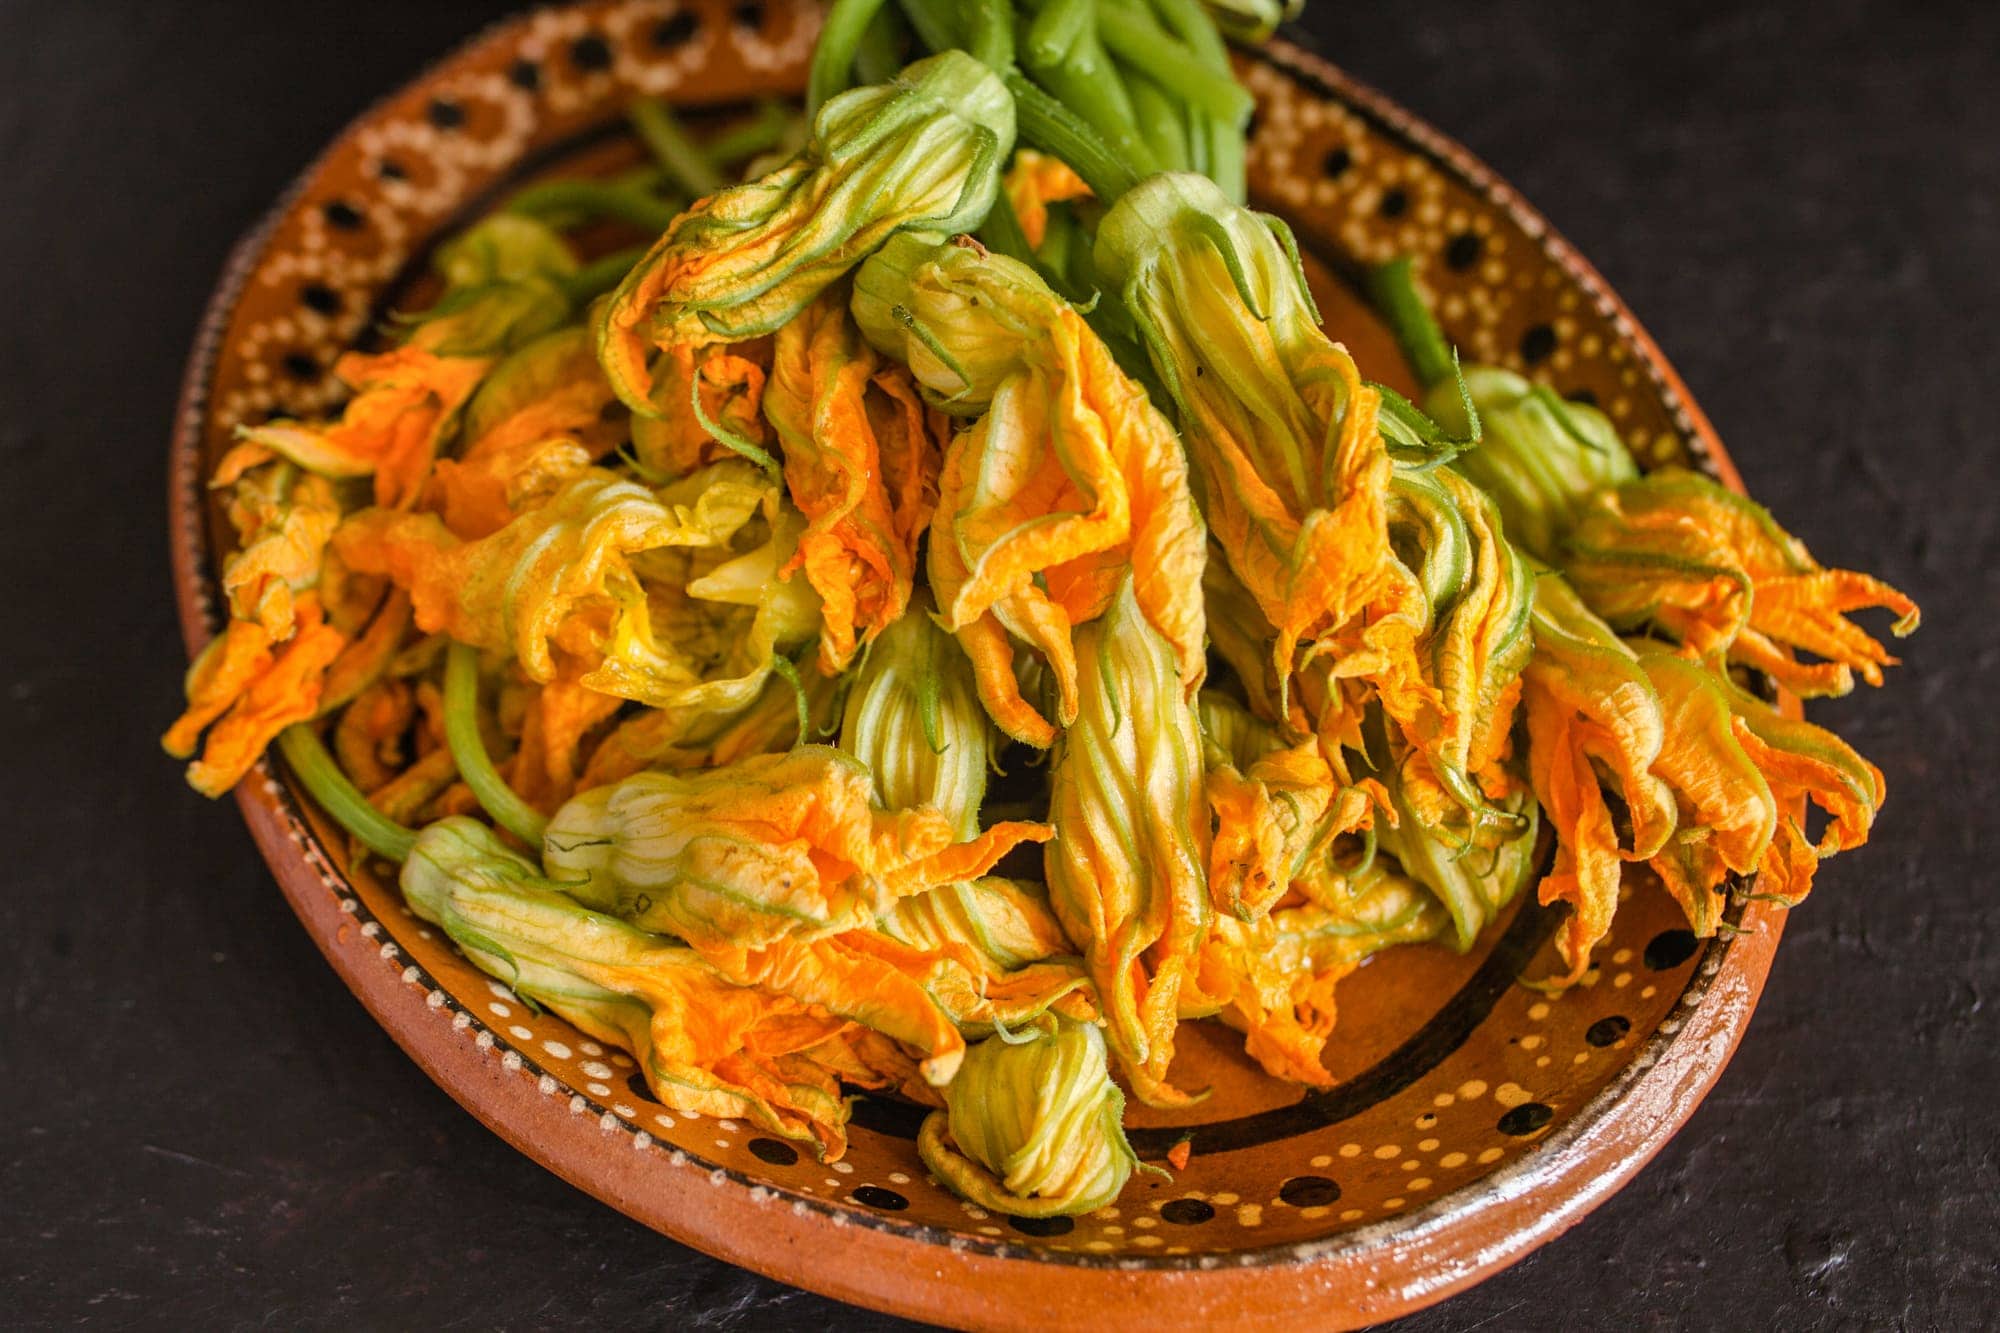 harvested zucchini blossoms